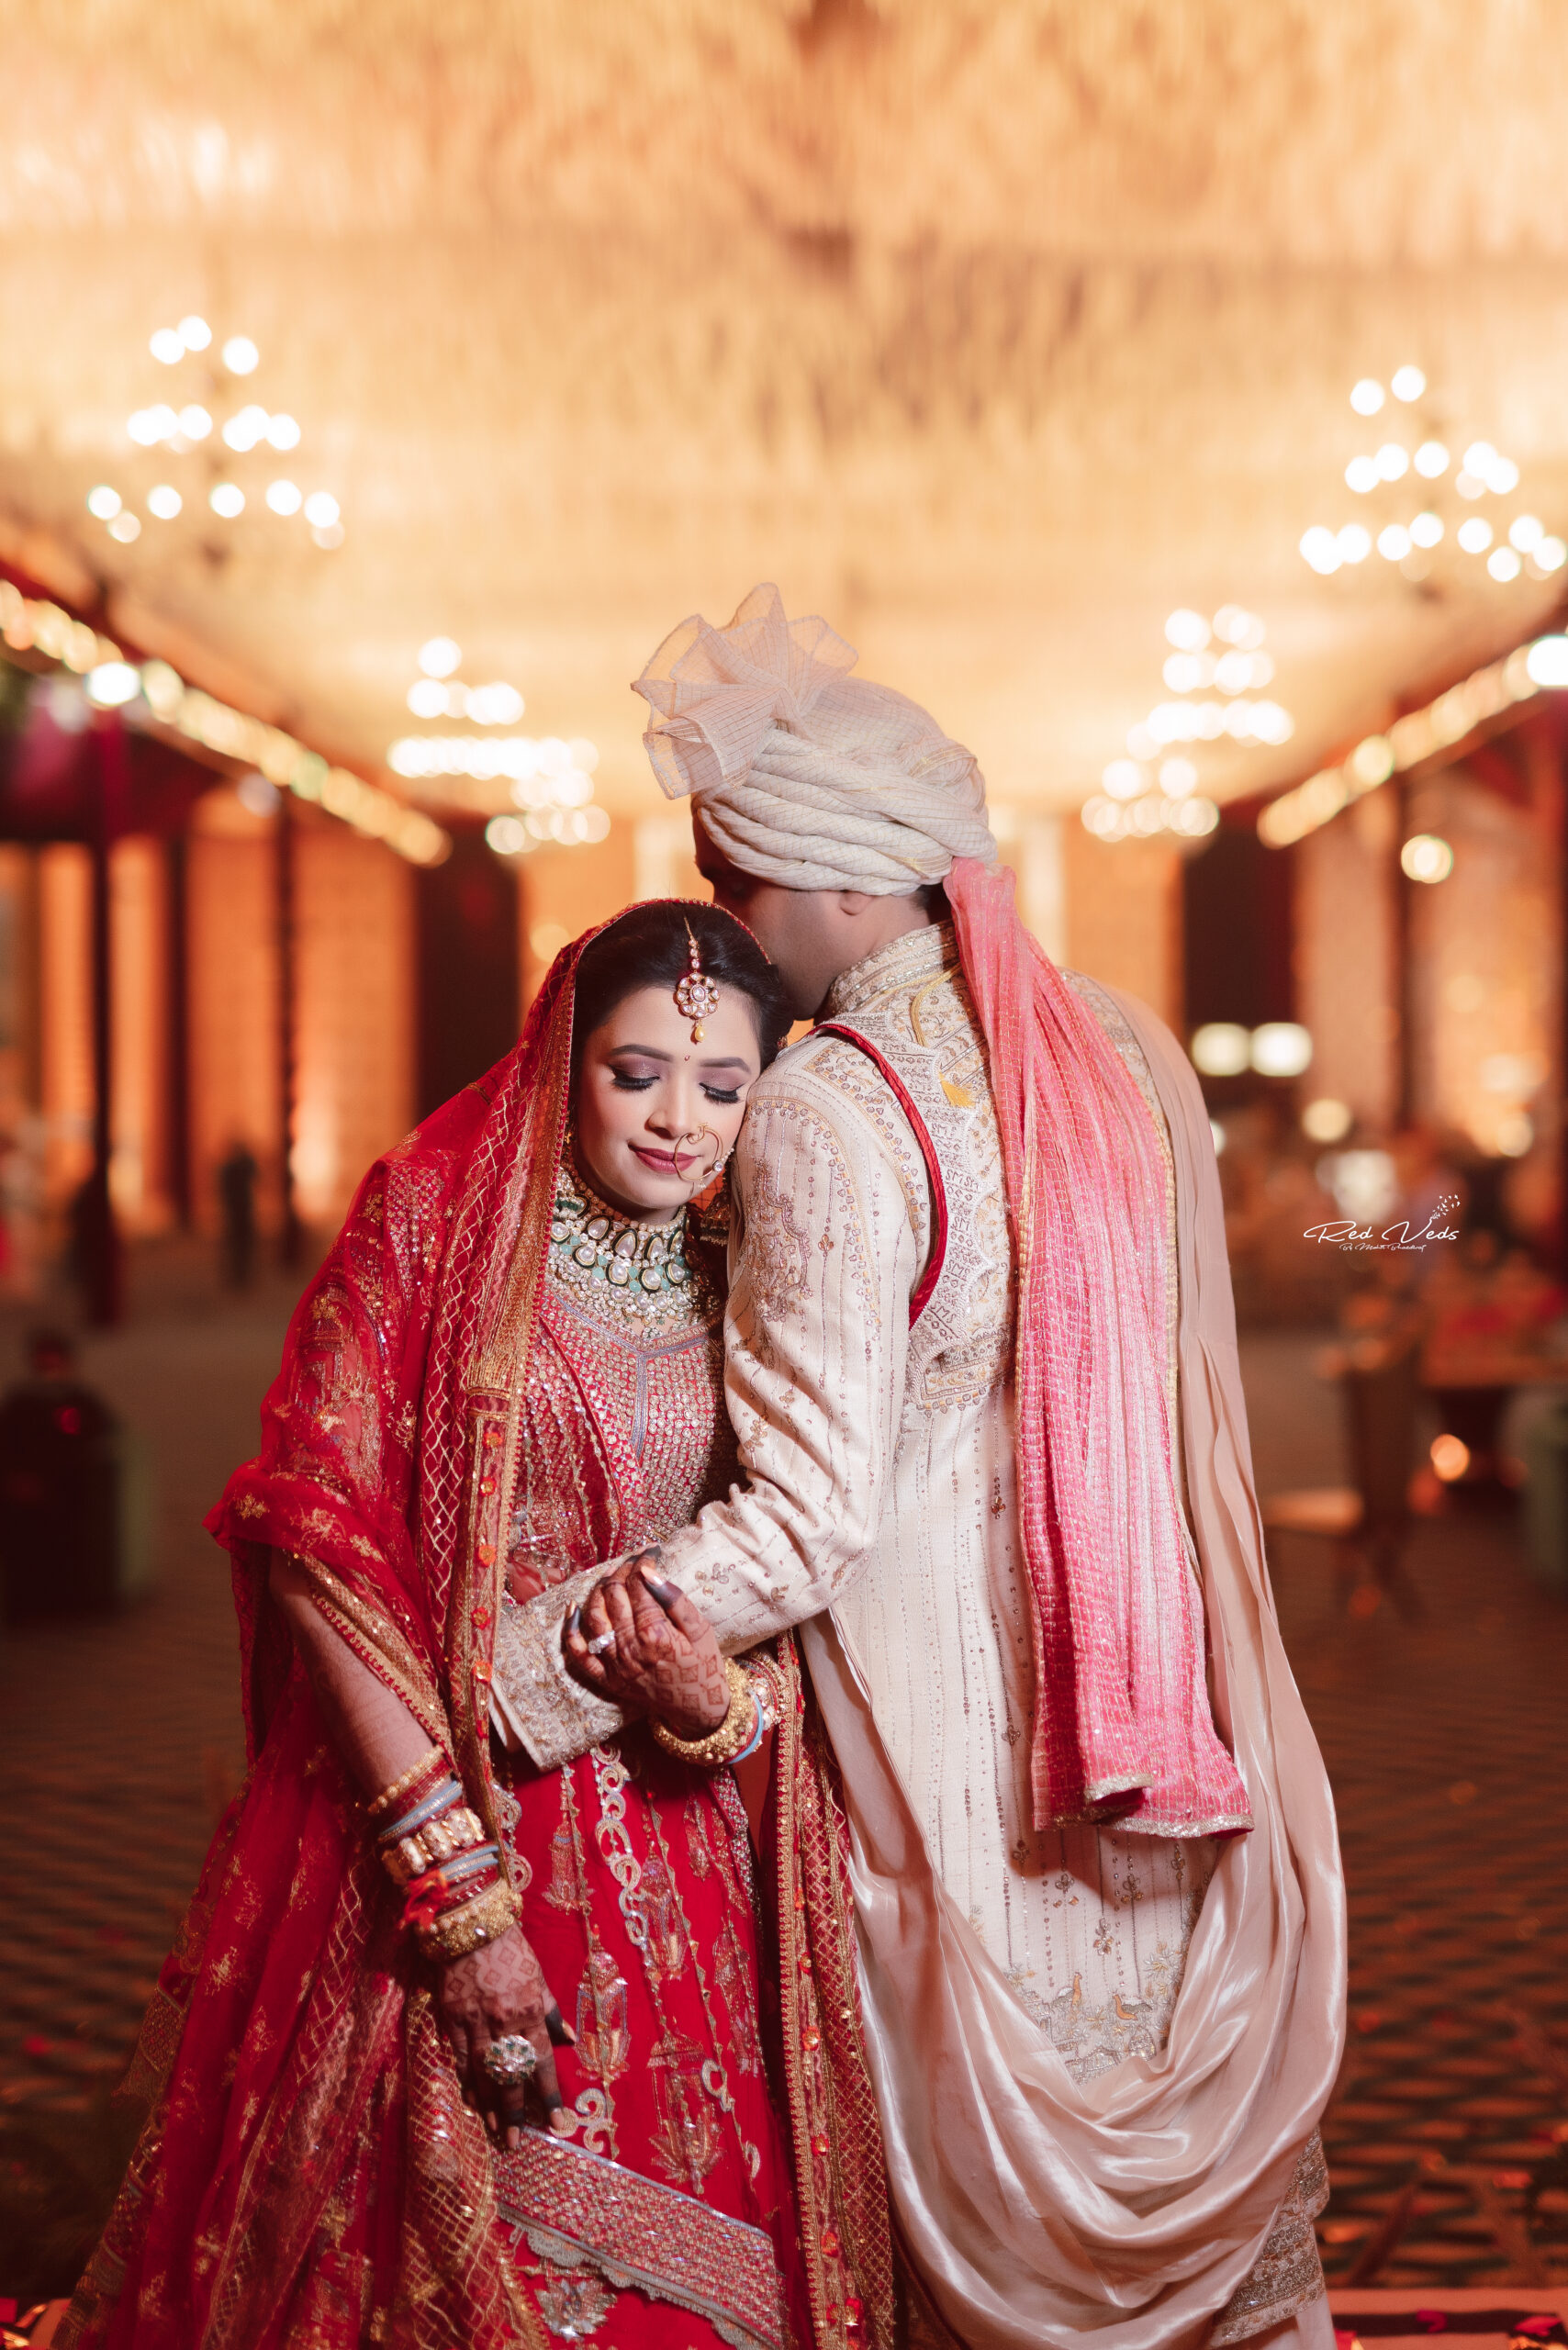 17 Beautiful Wedding Poses for the Bride and Groom